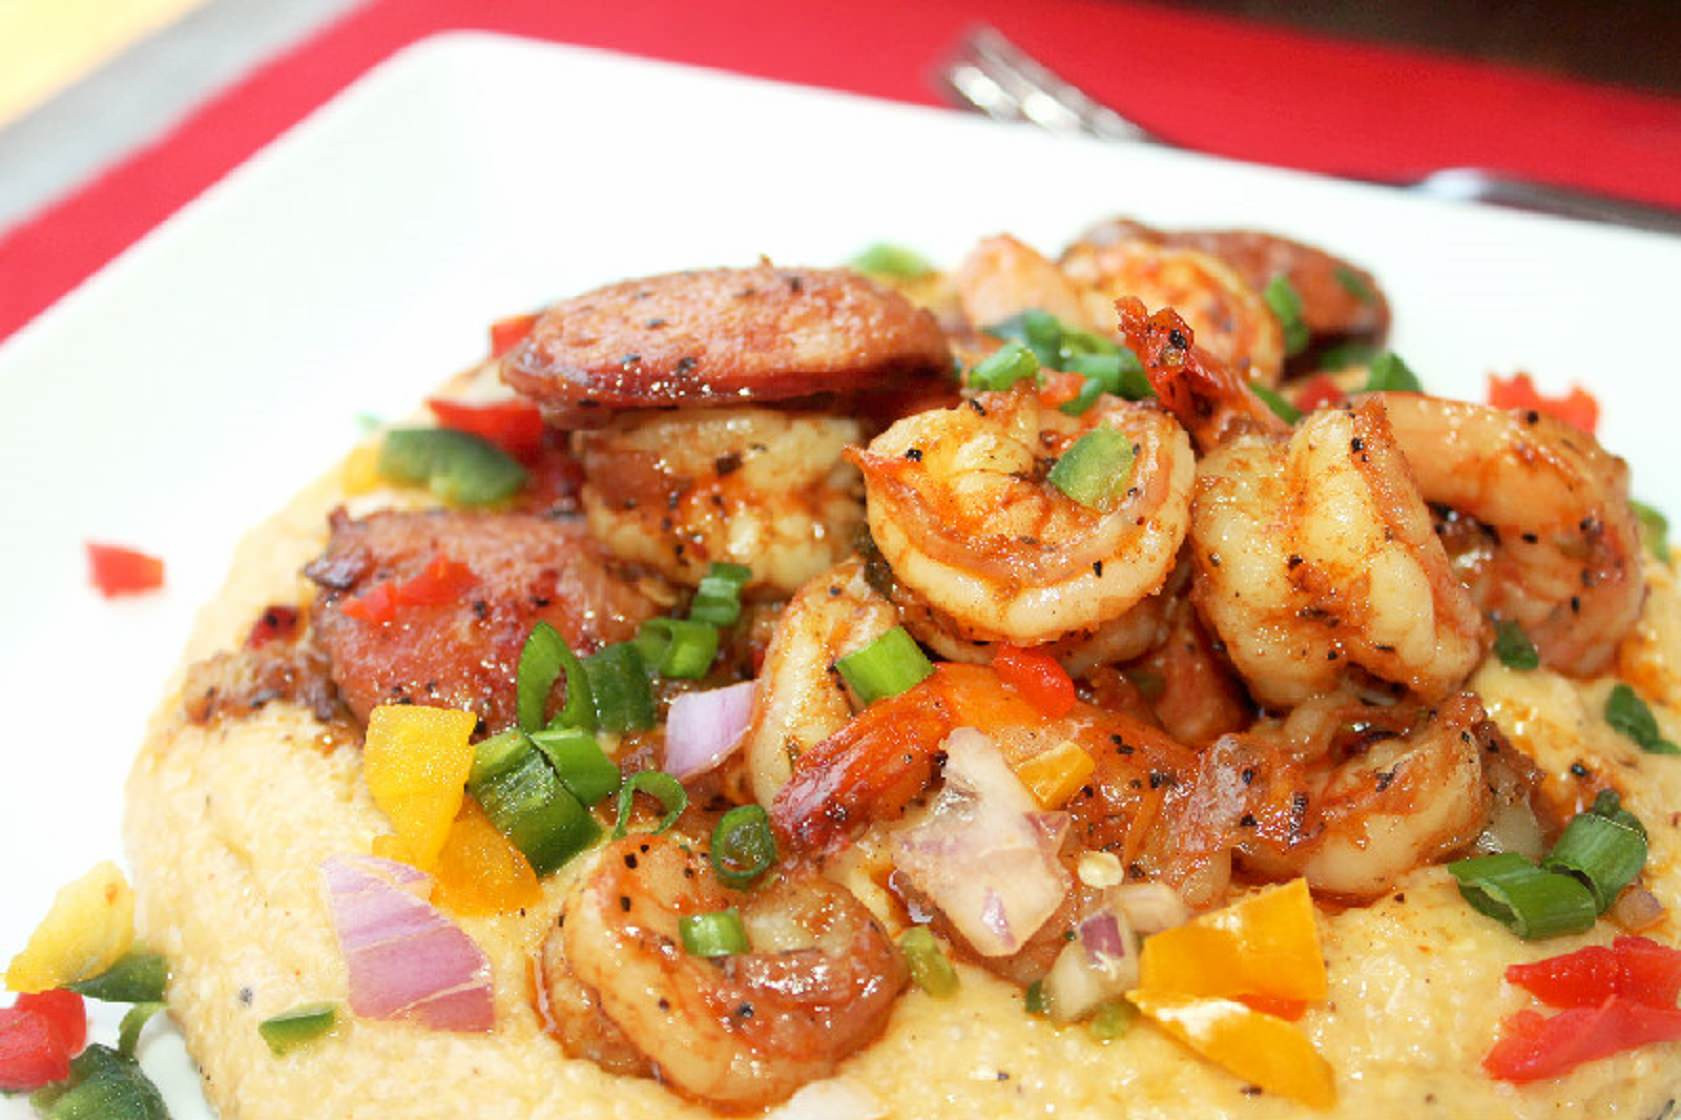 Best 15 Shrimp and Grits andouille